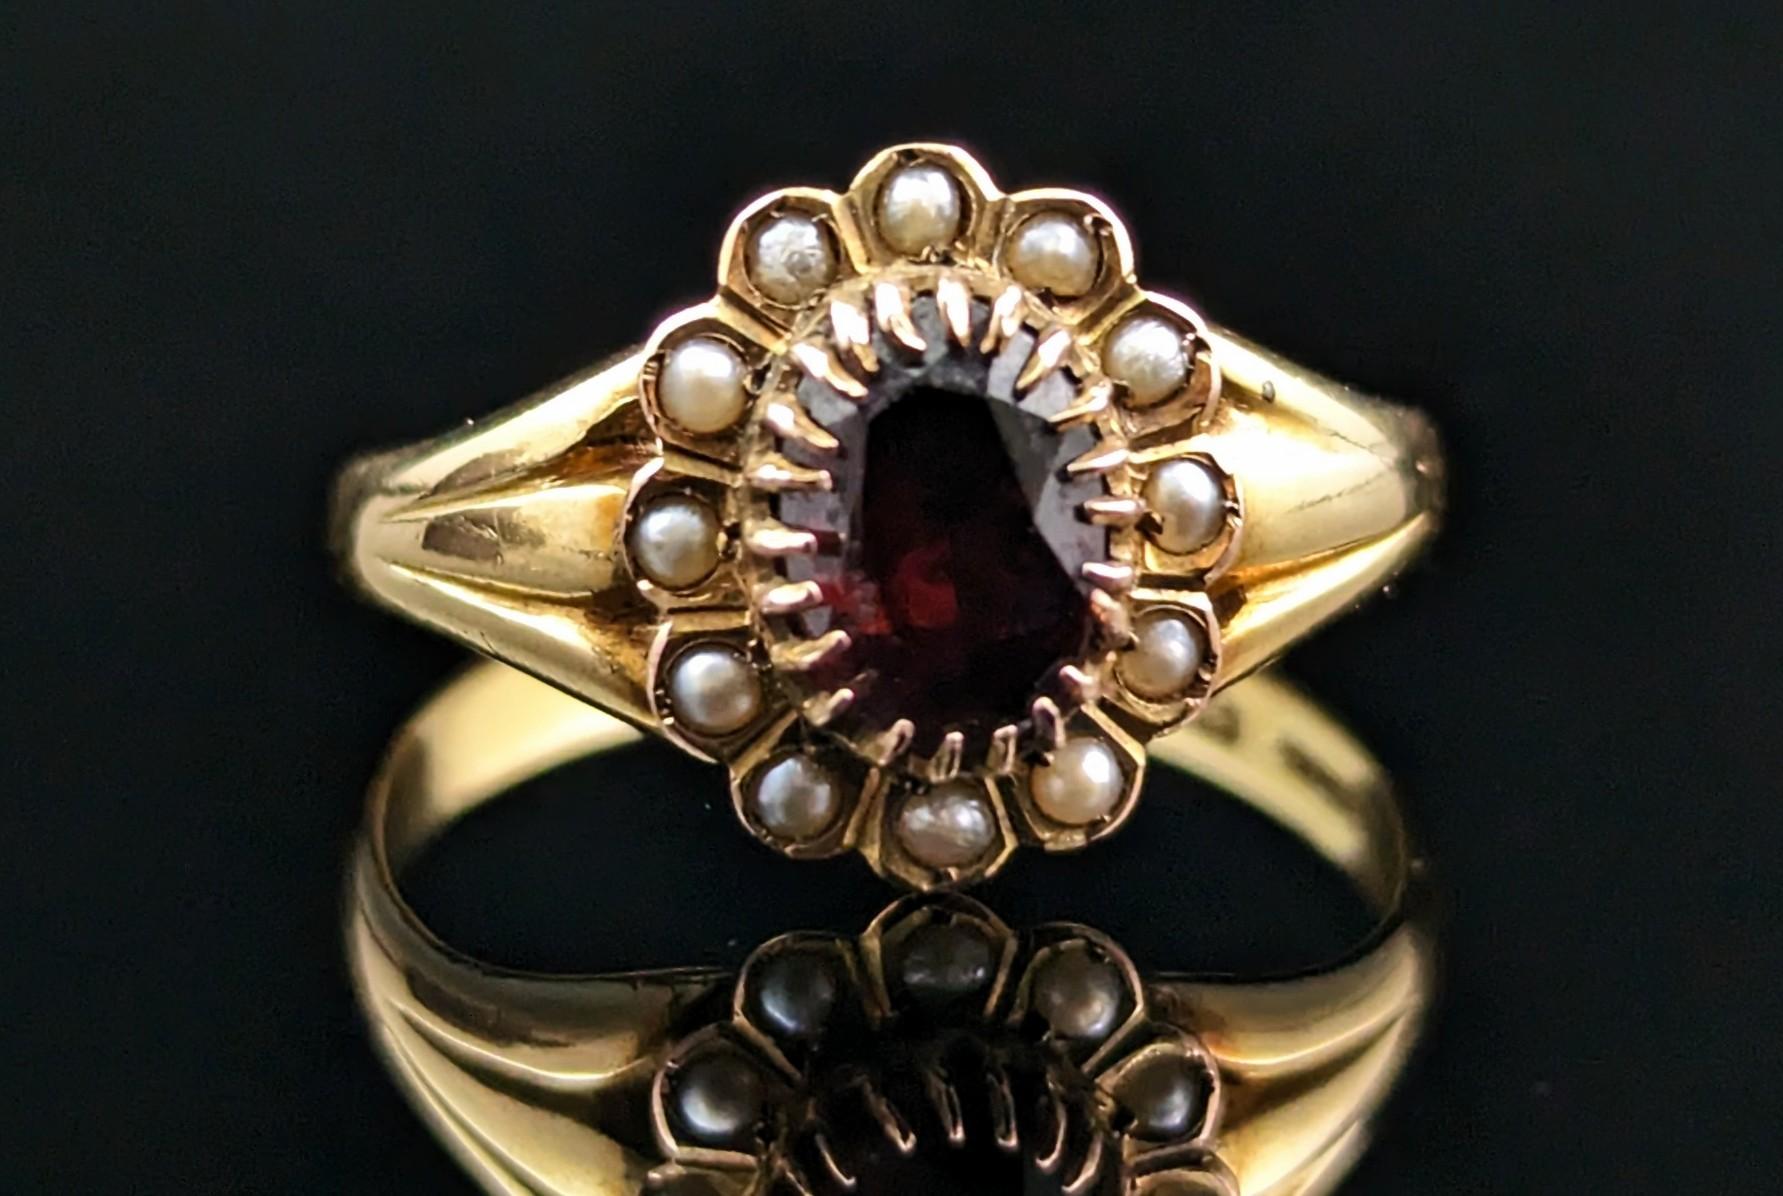 This gorgeous antique Garnet and seed pearl cluster ring is just the ticket if you are looking for a new addition to your antique ring collection or a special gift.

She is crafted in solid buttery 18kt yellow gold with a rich red, faceted oval cut